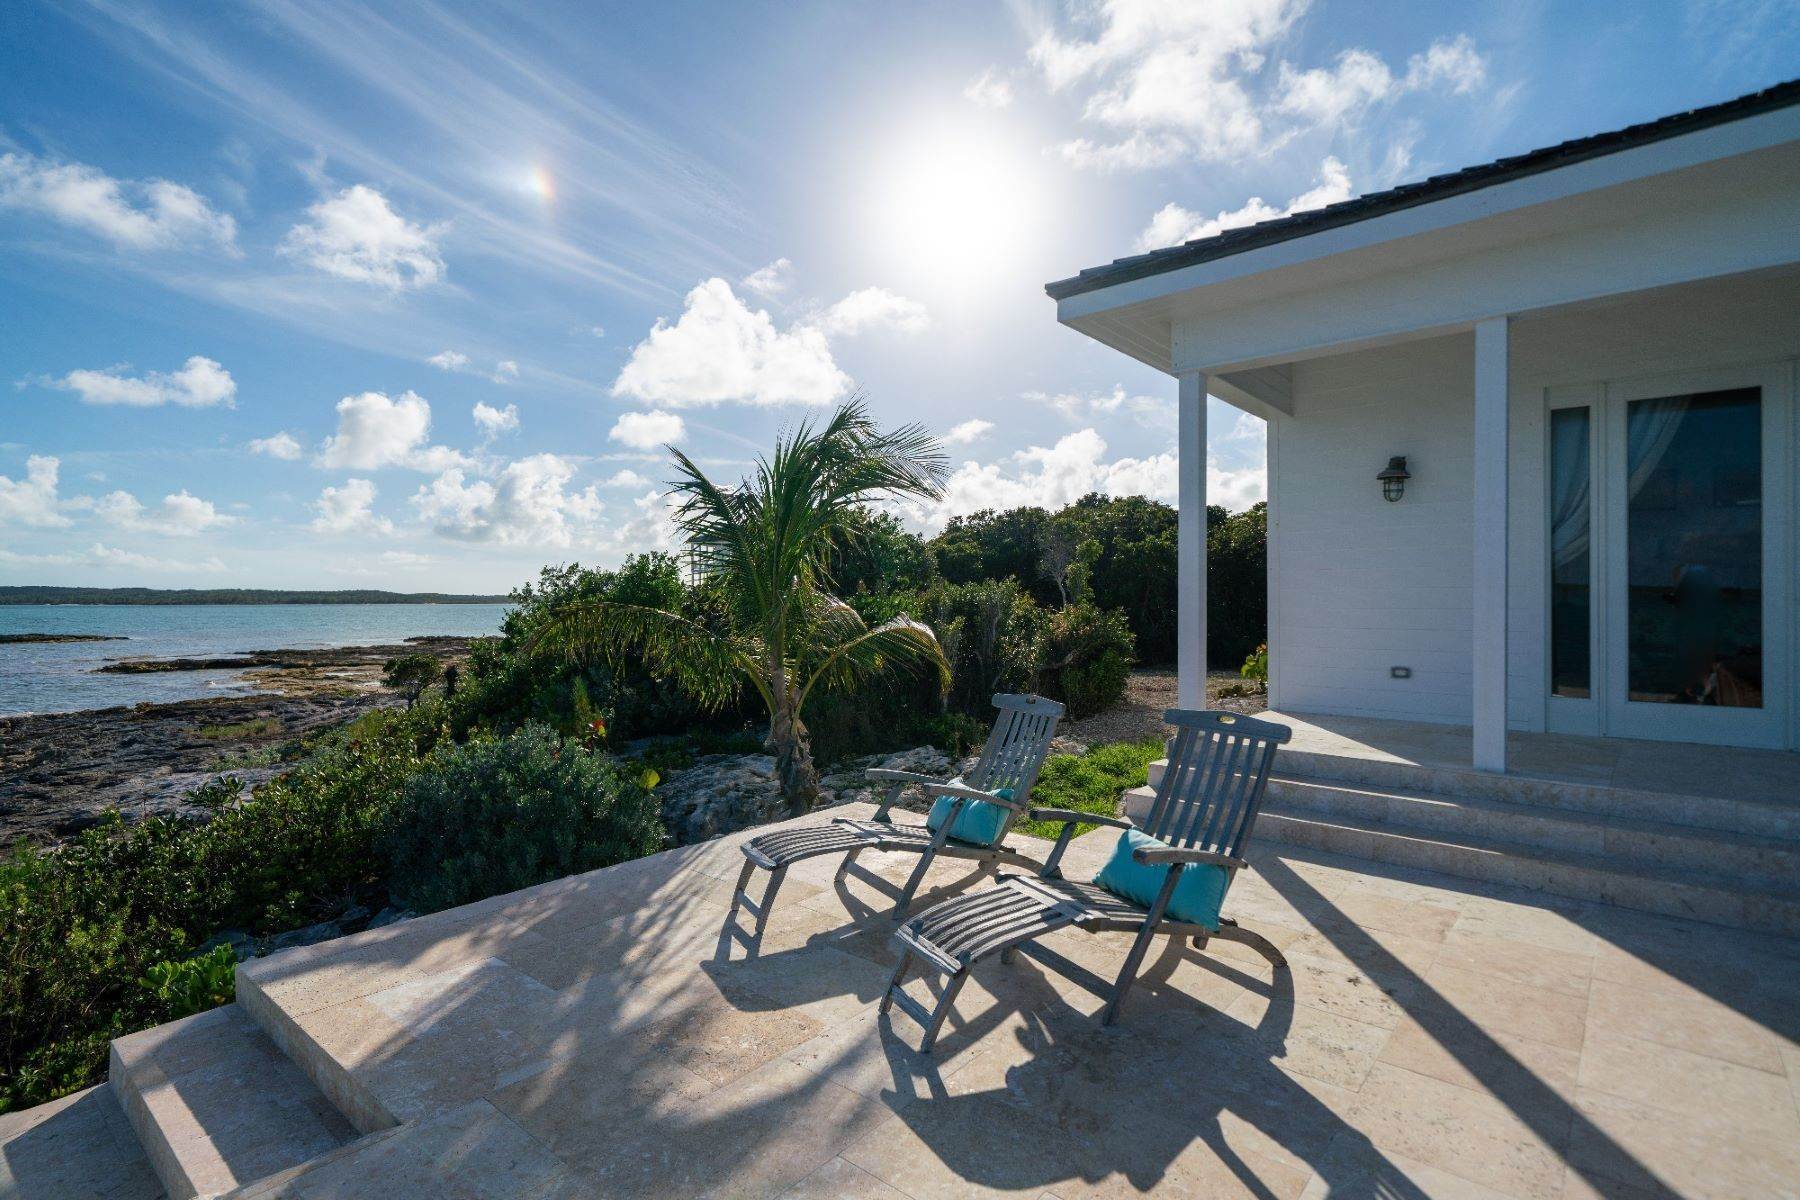 13. Private Islands for Sale at Harbour Island, Eleuthera Bahamas